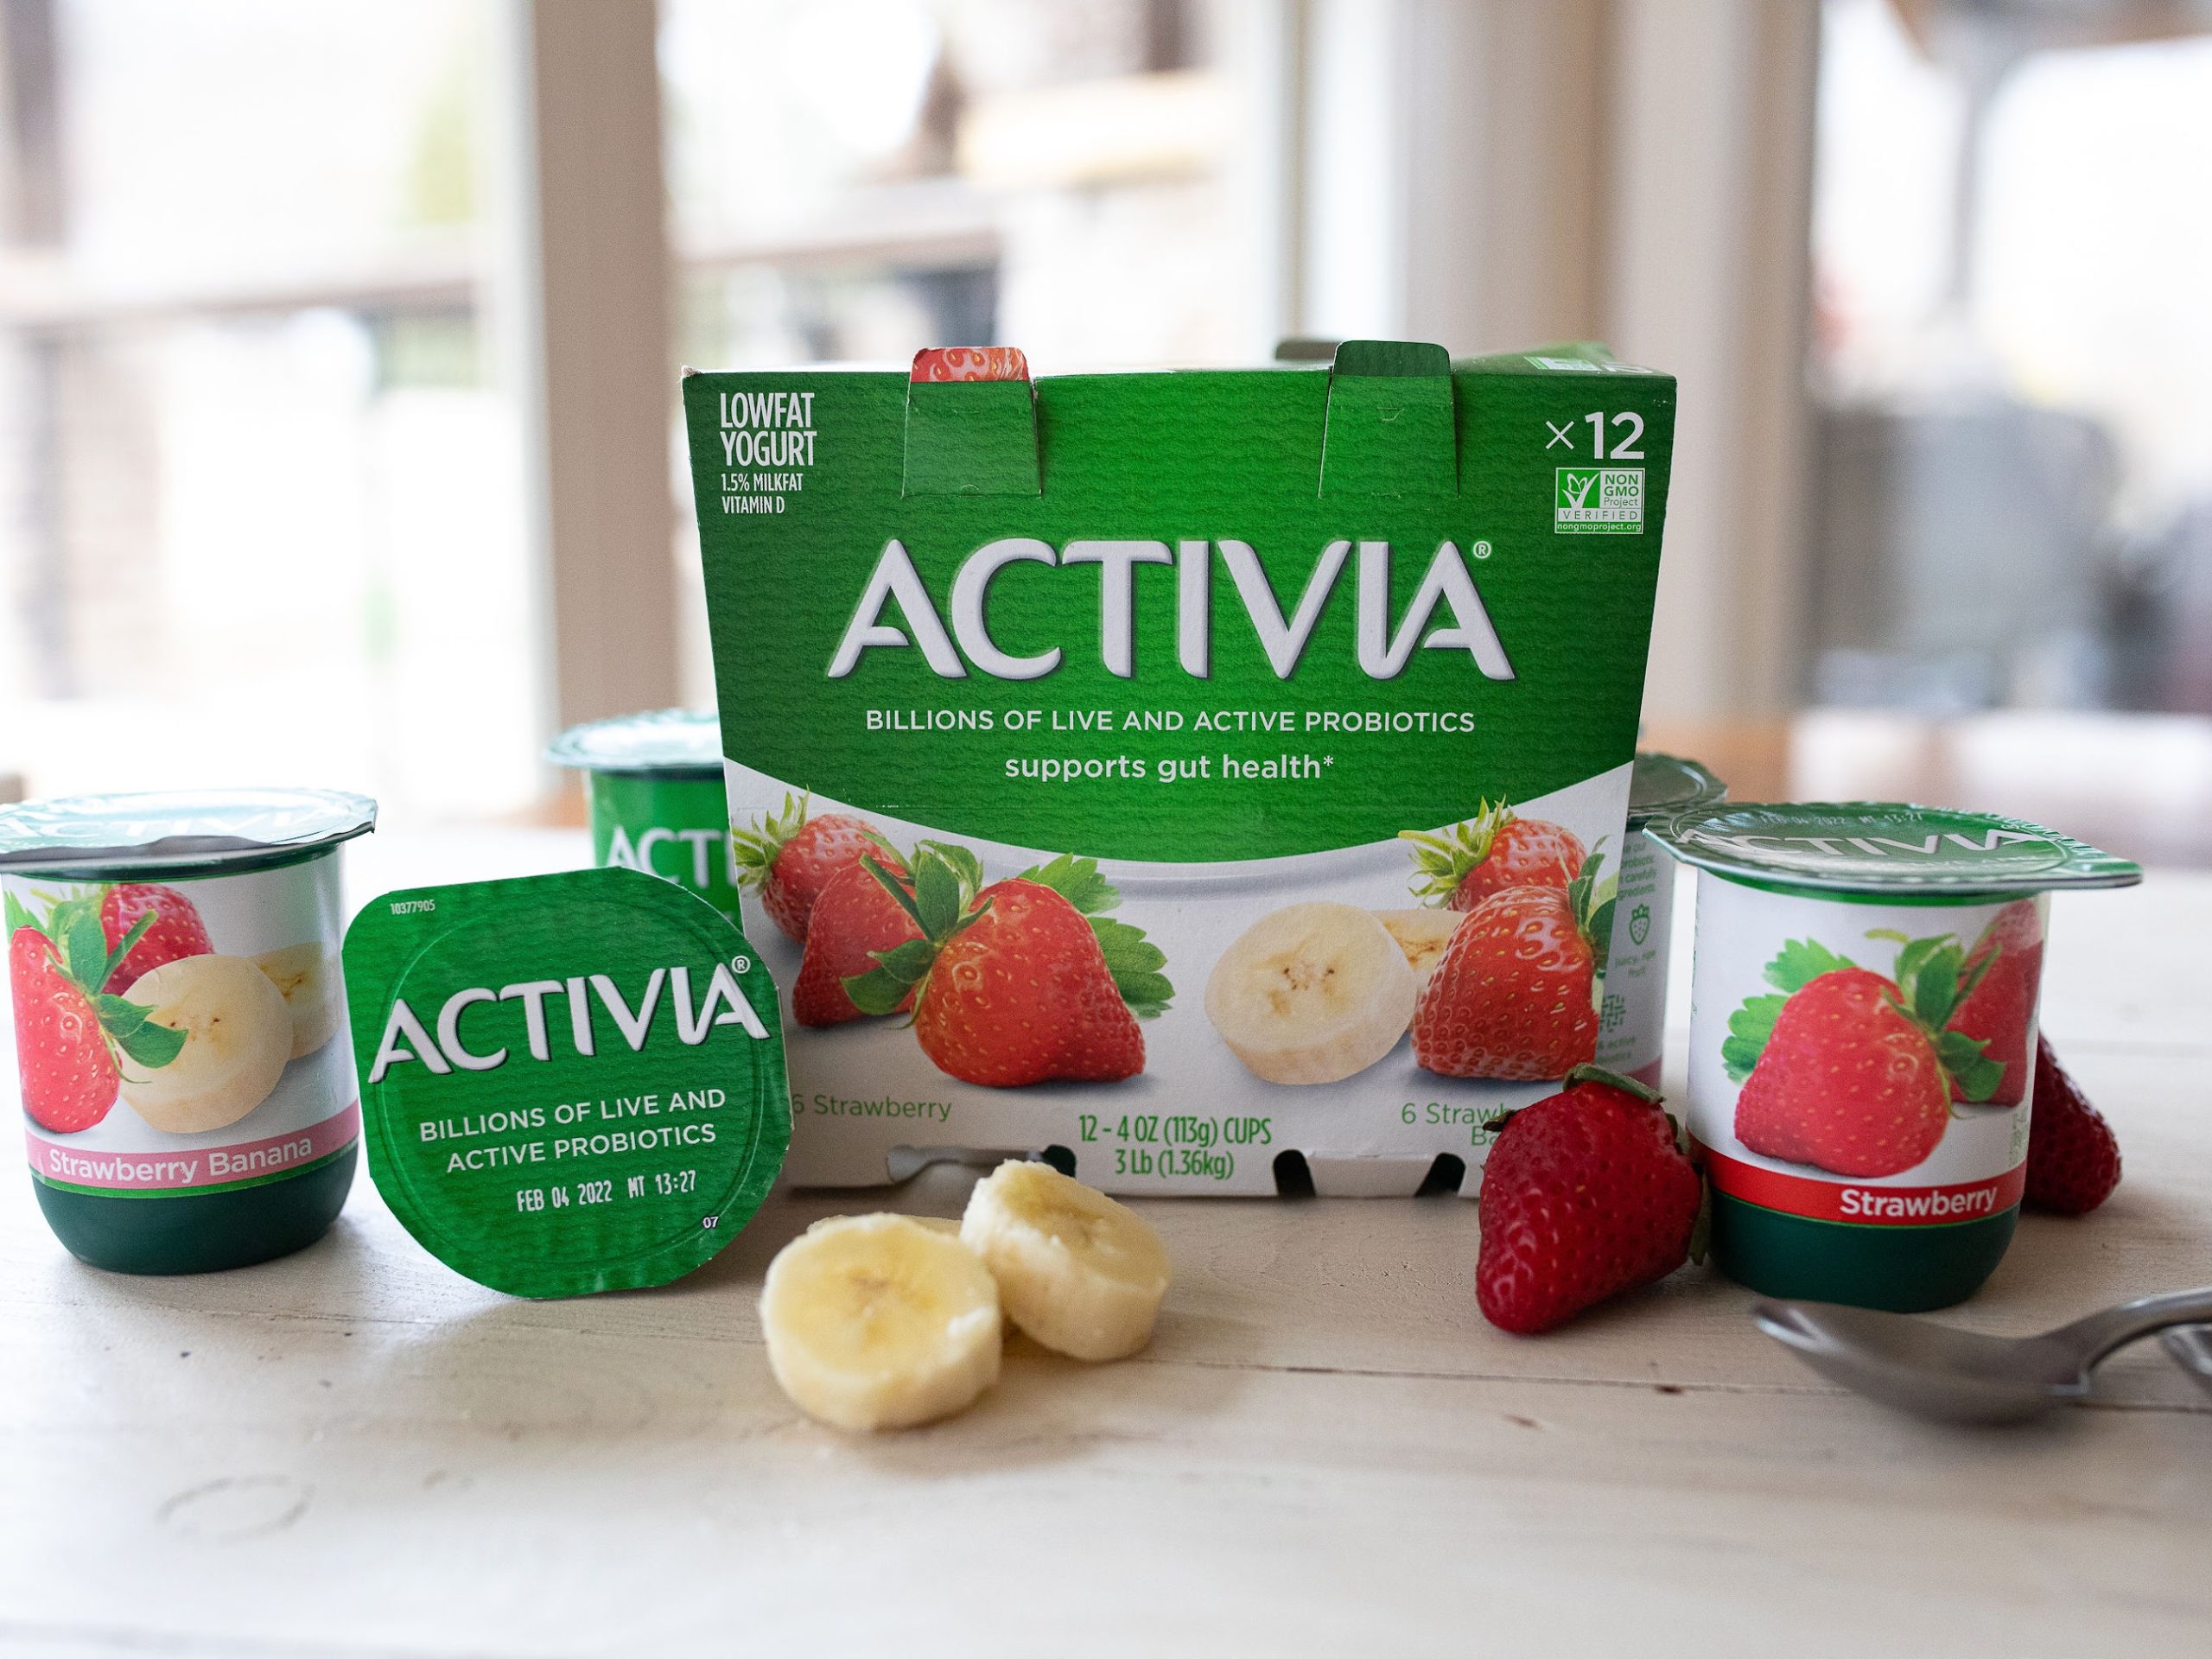 Keep Earning Publix Gift Cards With The Crave & Save Program - Great Deal On Activia This Week At Publix on I Heart Publix 1